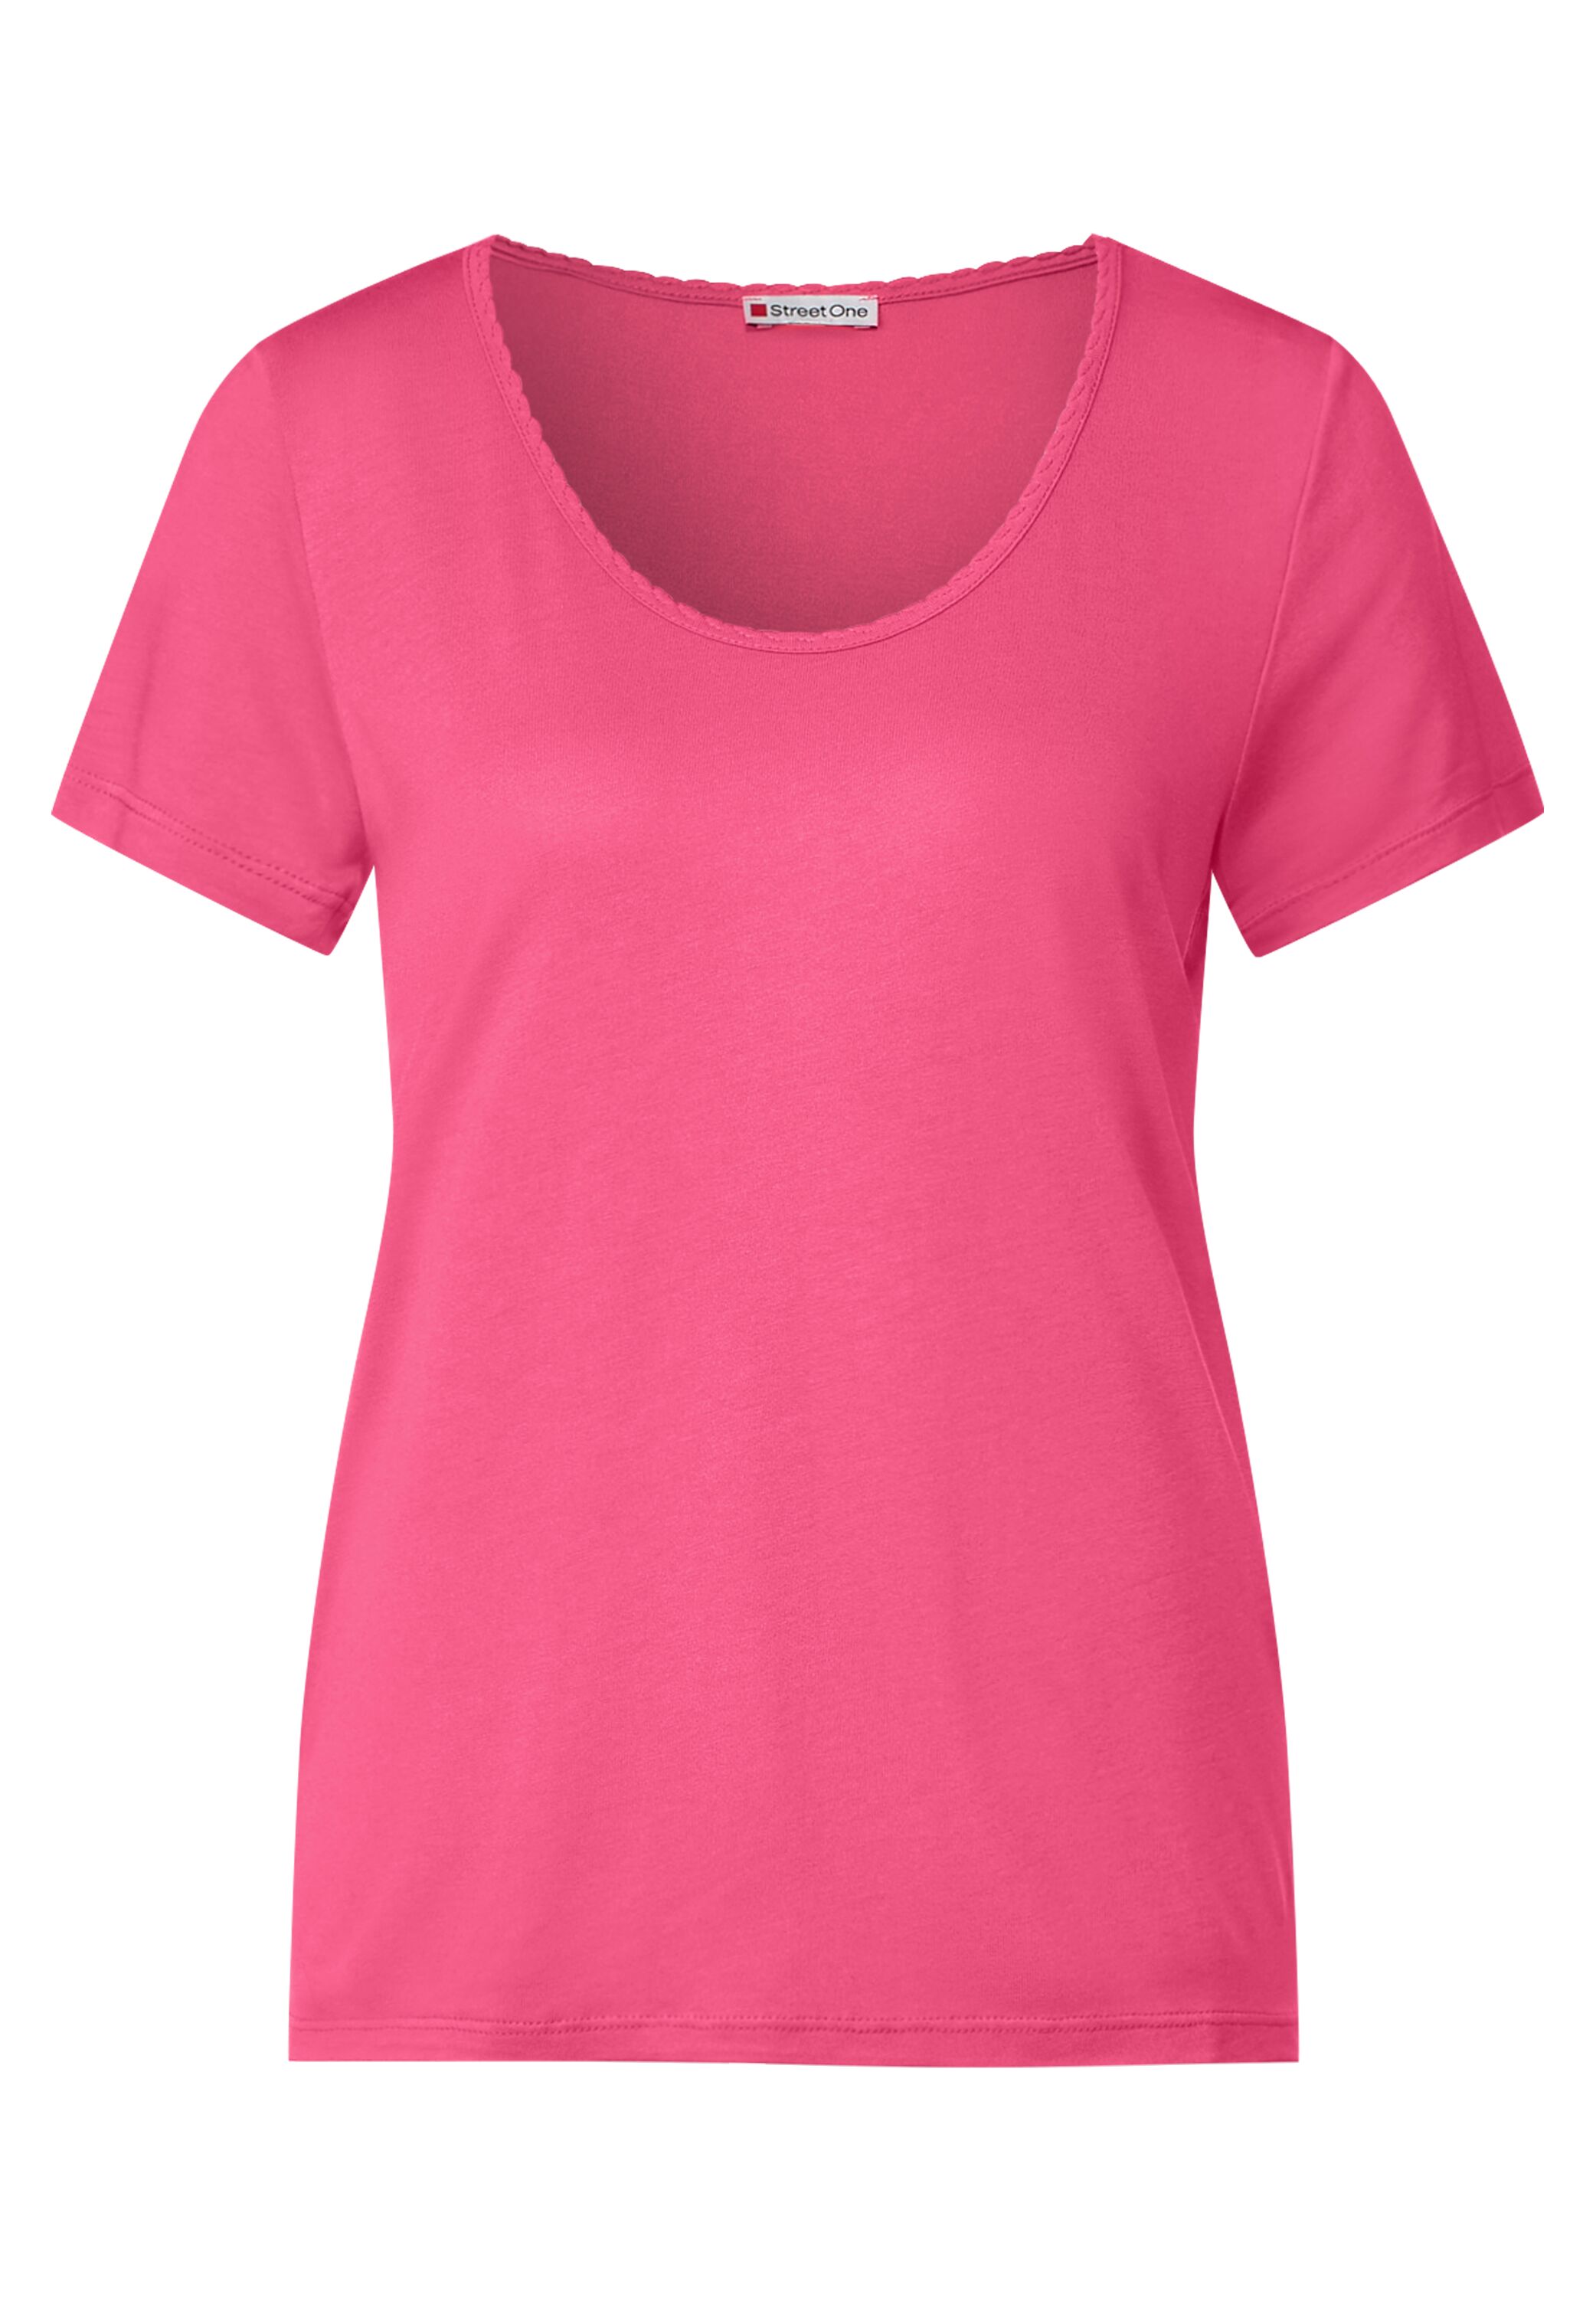 Street One T-Shirt in Berry Mode im Rose CONCEPT reduziert SALE A320124-14647 